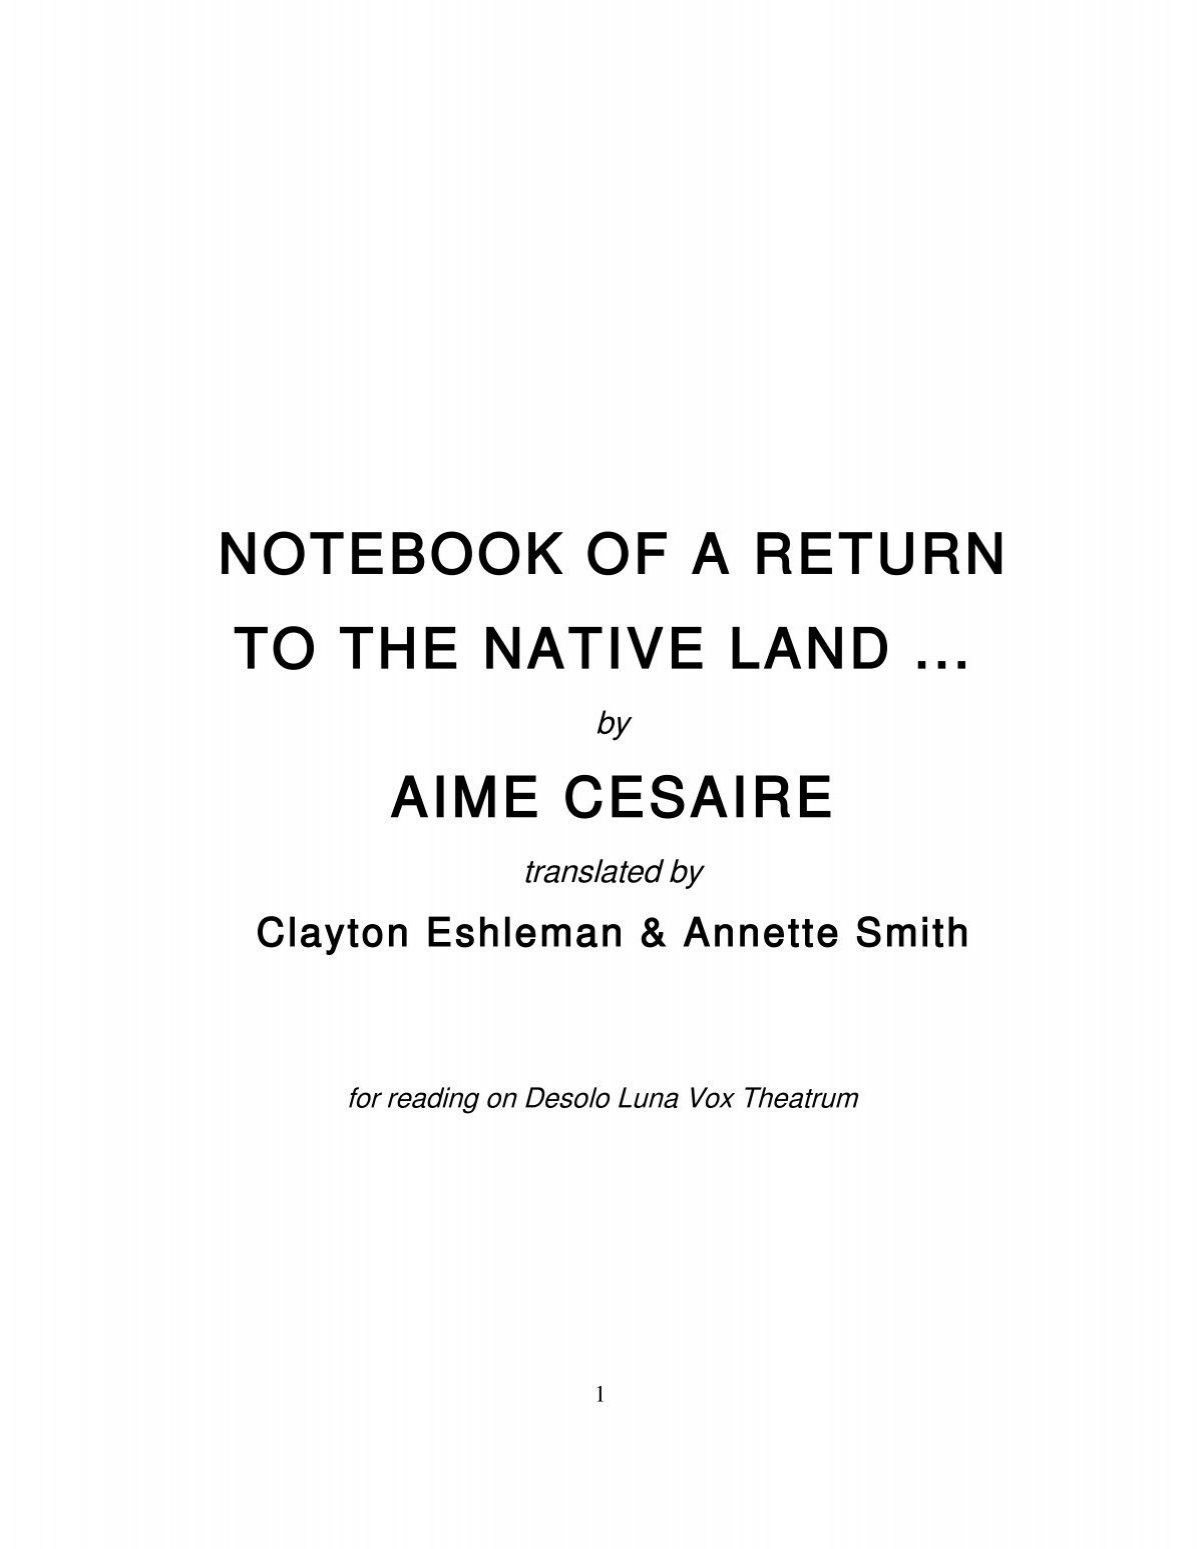 AIME CESAIRE--NOTEBOOK OF A RETURN TO A NATIVE LAND